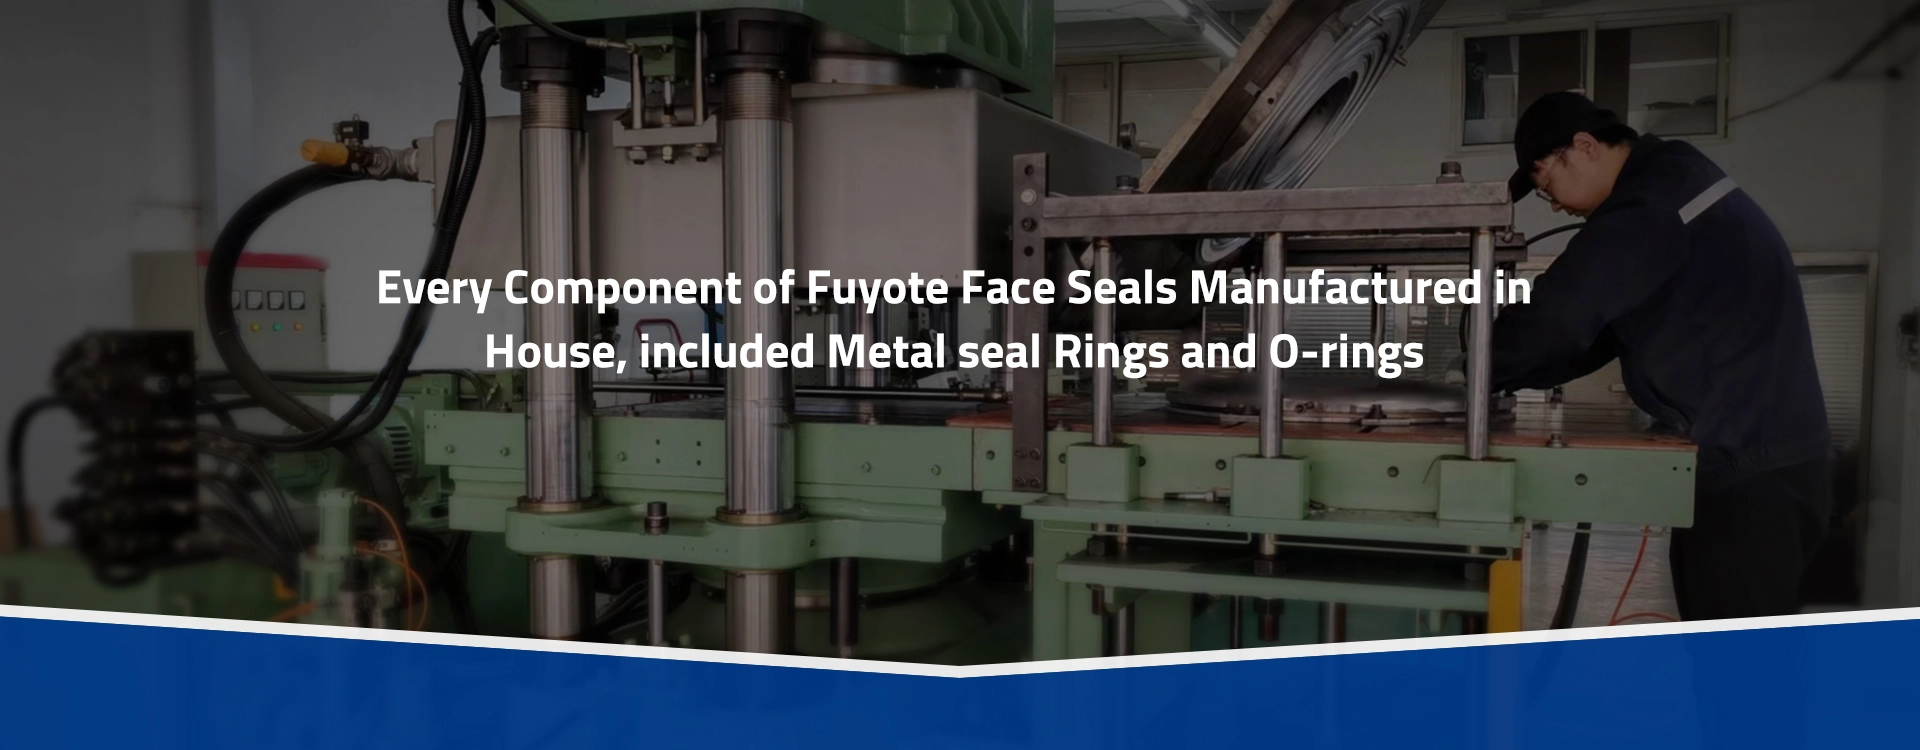 Every Component of Fuyote Face Seals Manufactured in House